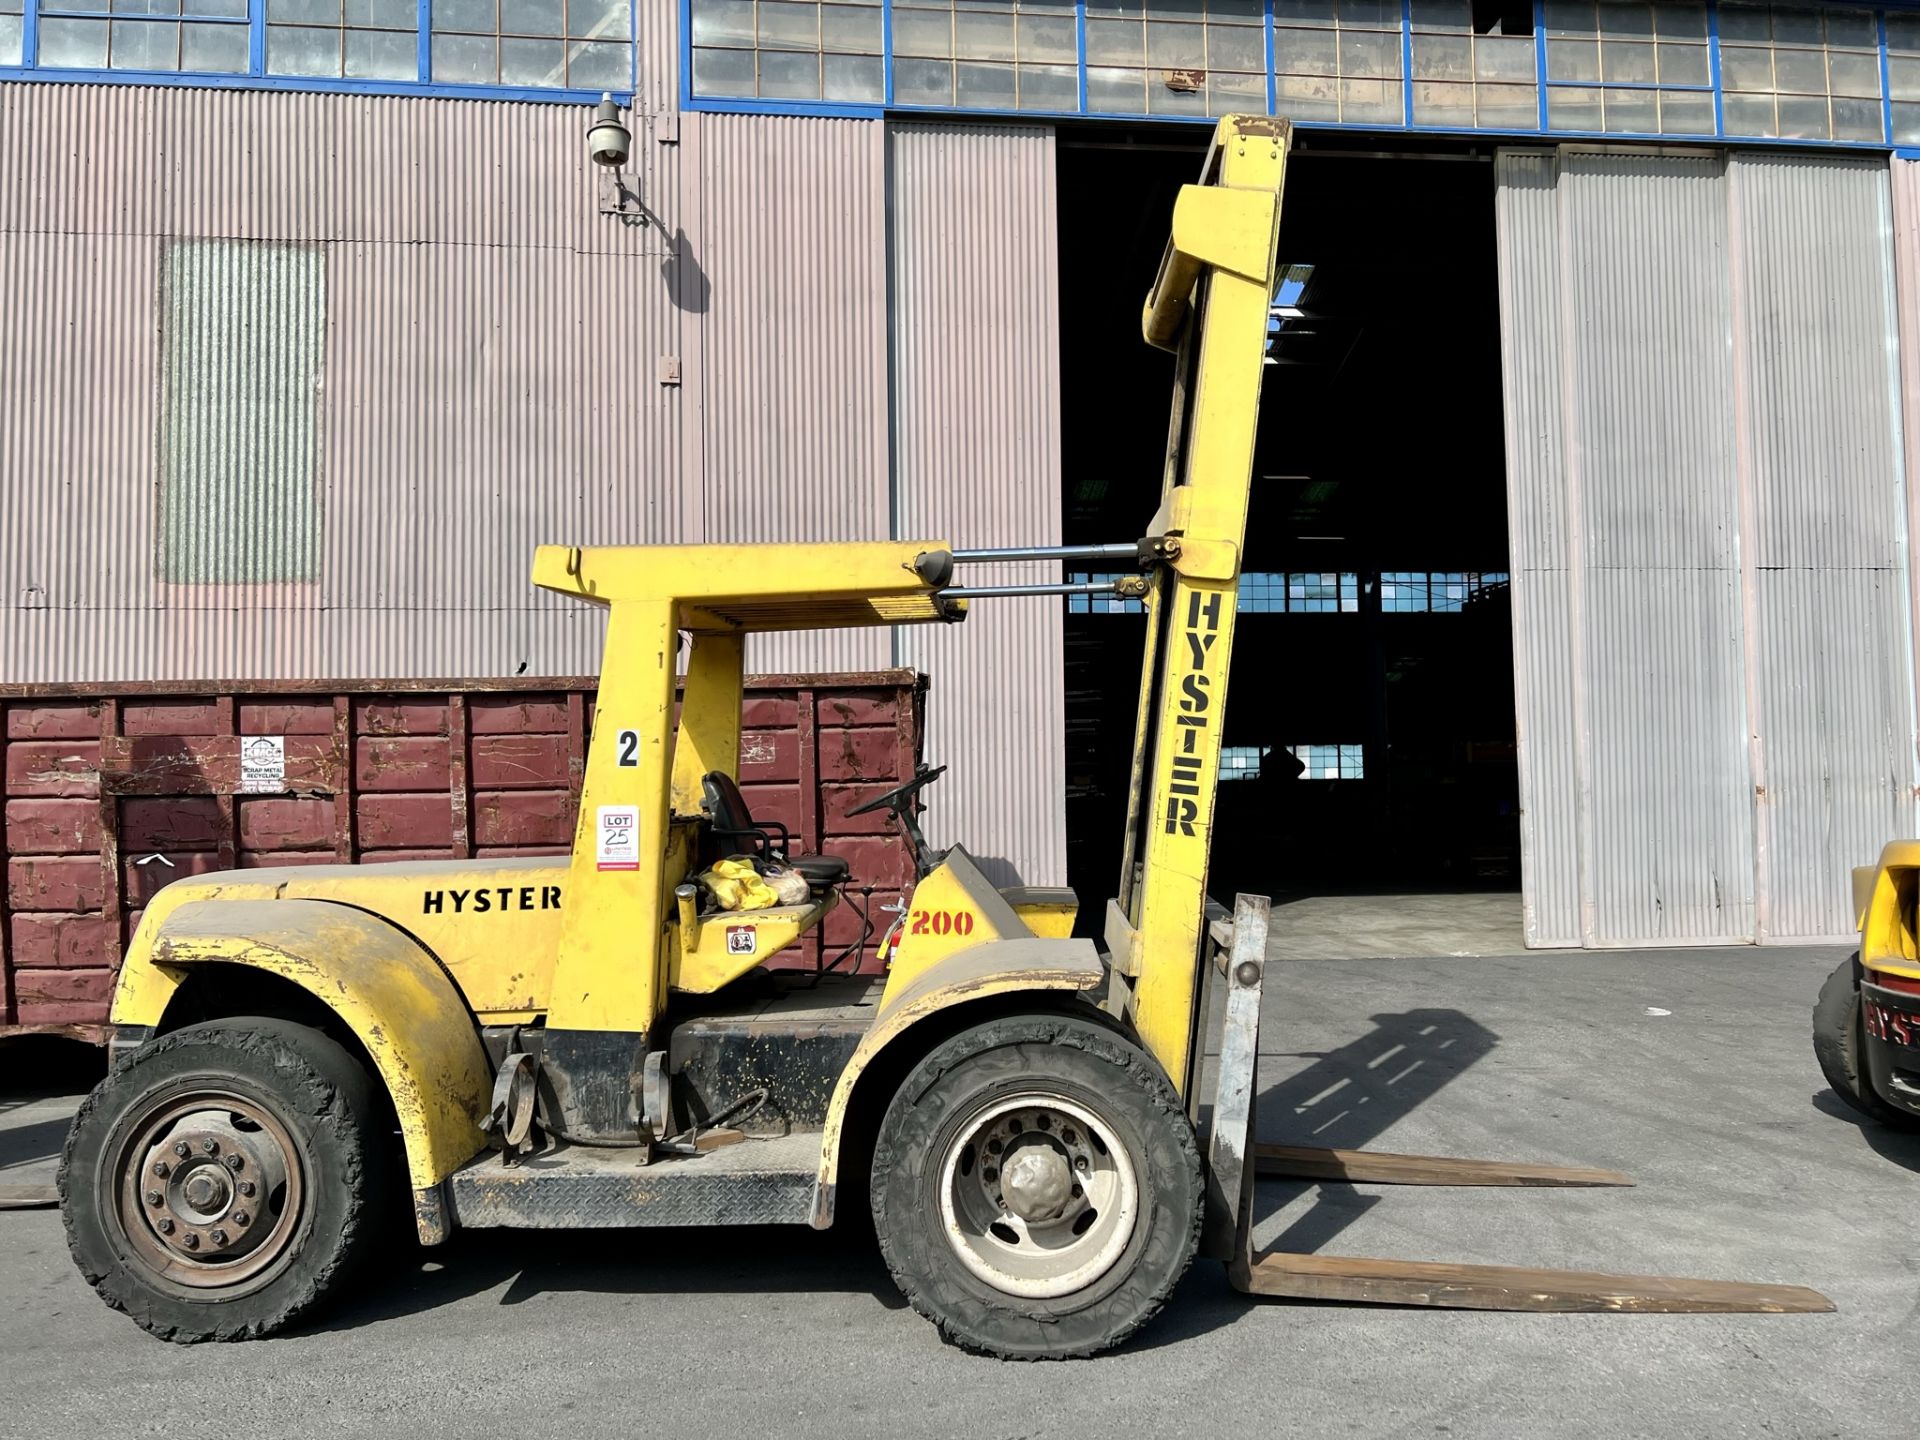 HYSTER 193A LPG FORKLIFT, 18,000 LB CAPACITY, 6' FORKS, 2-STAGE MAST, SOLID TIRES, APPROX. 0957 - Image 3 of 18